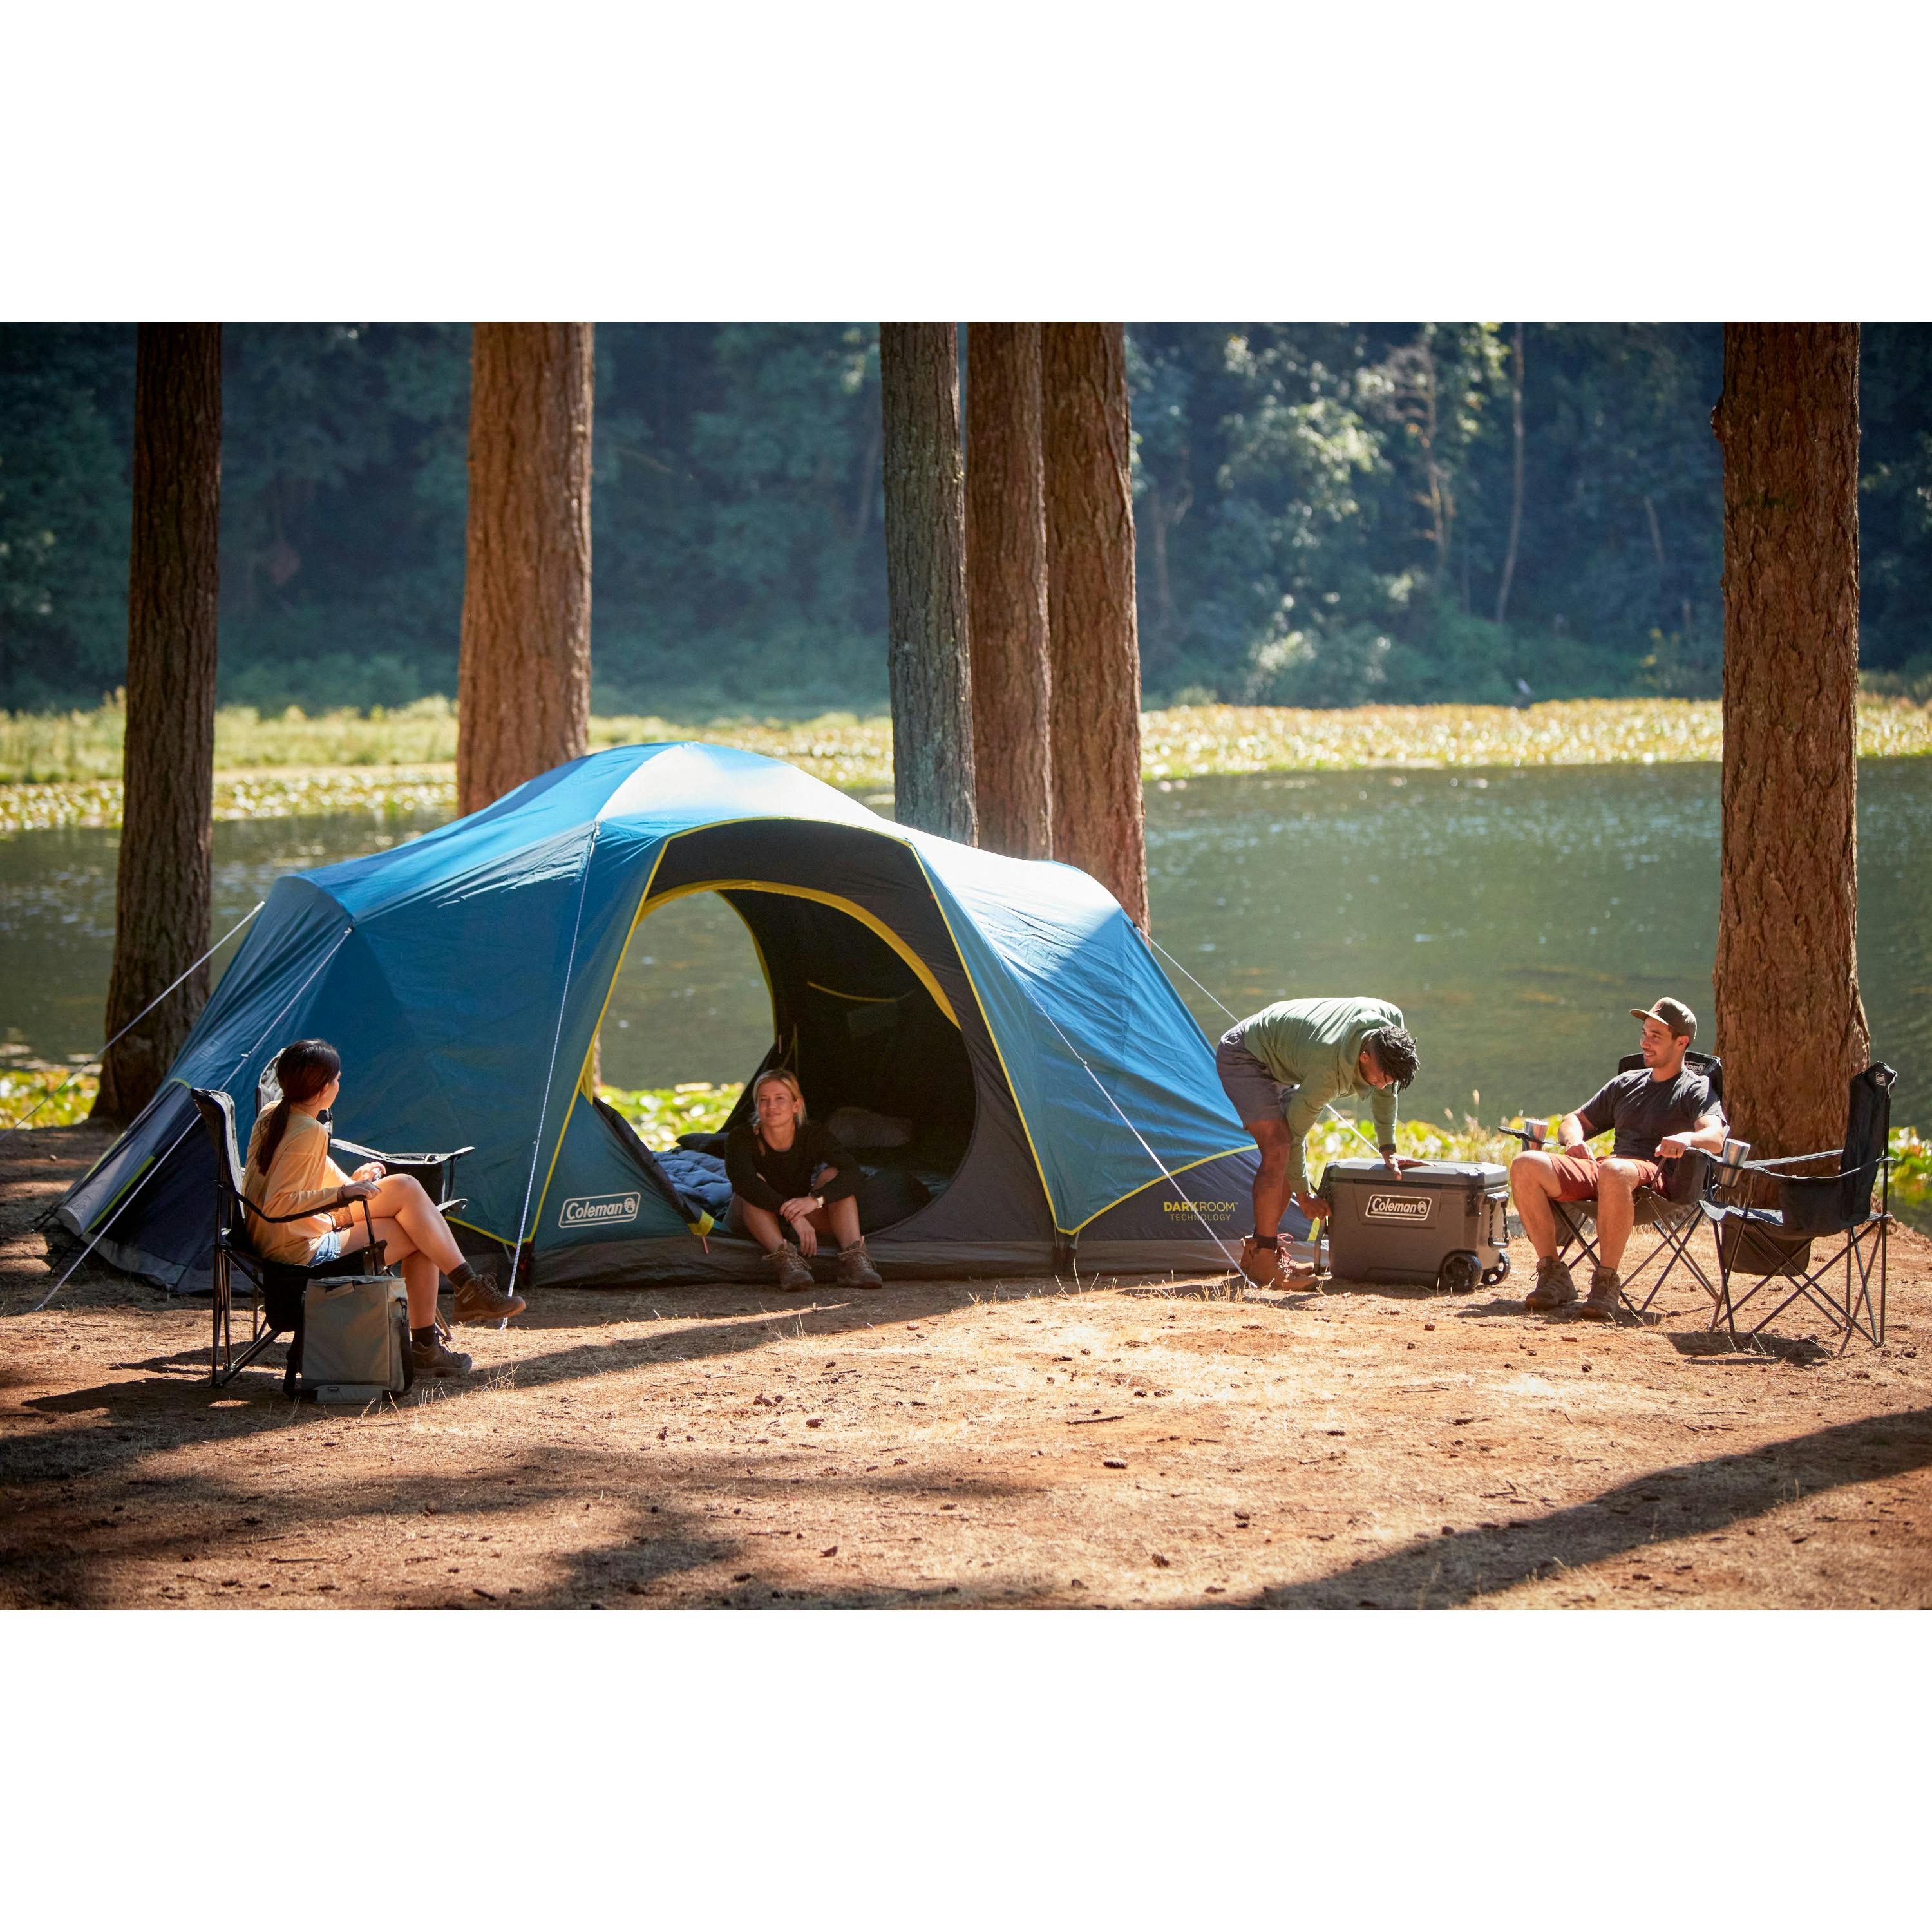 Coleman Skydome™ XL 10 Person Camping Tent with Dark Room Technology